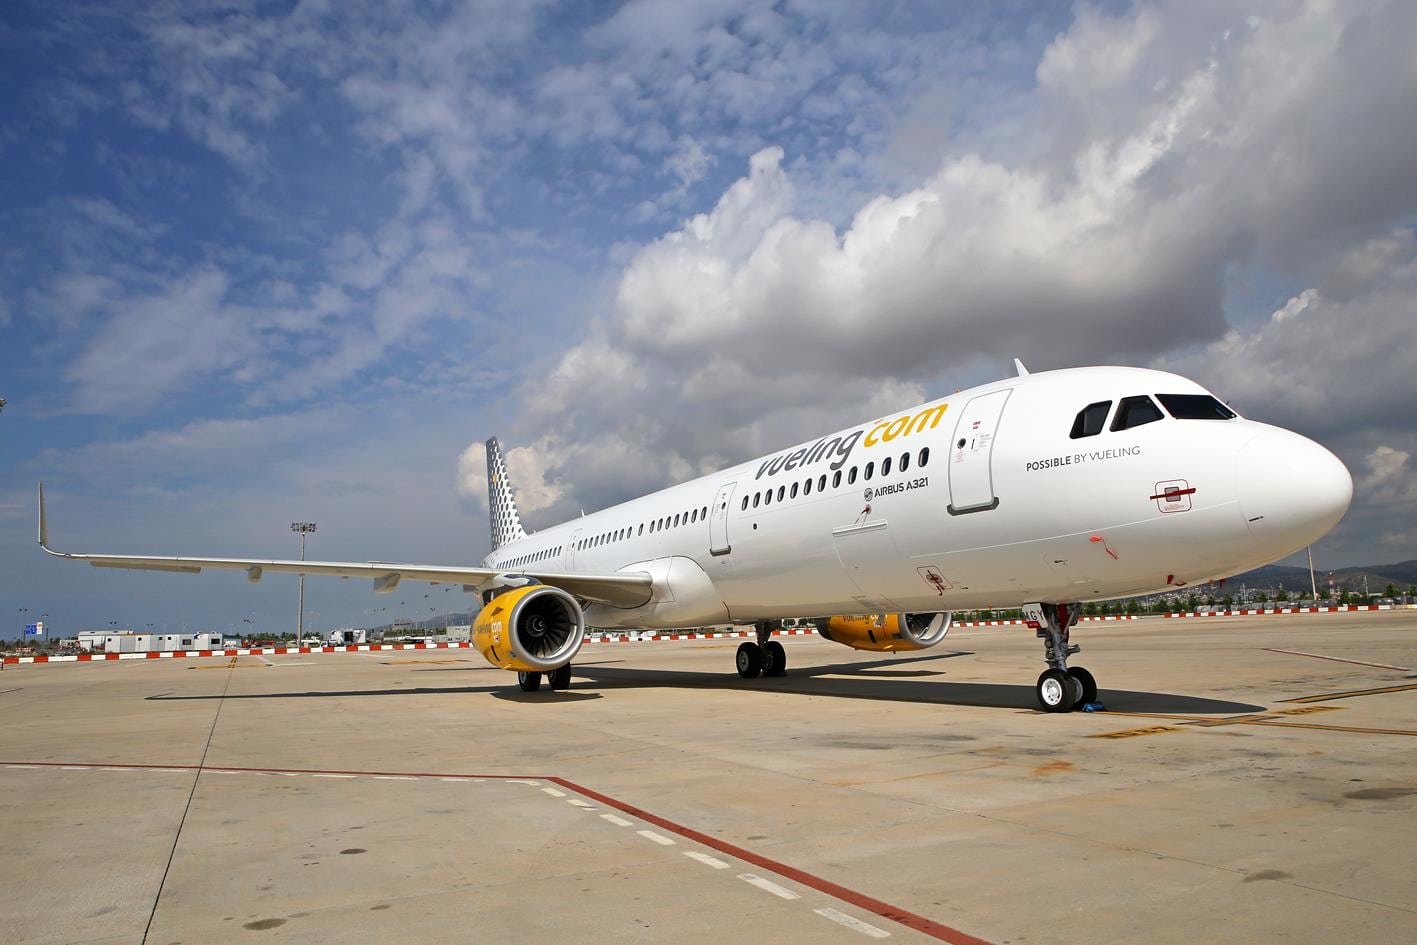 International Airlines Group is planning to start low cost, long haul flights from Barcelona. But it is unlikely Vueling, which is based in Barcelona, will fly the routes. 